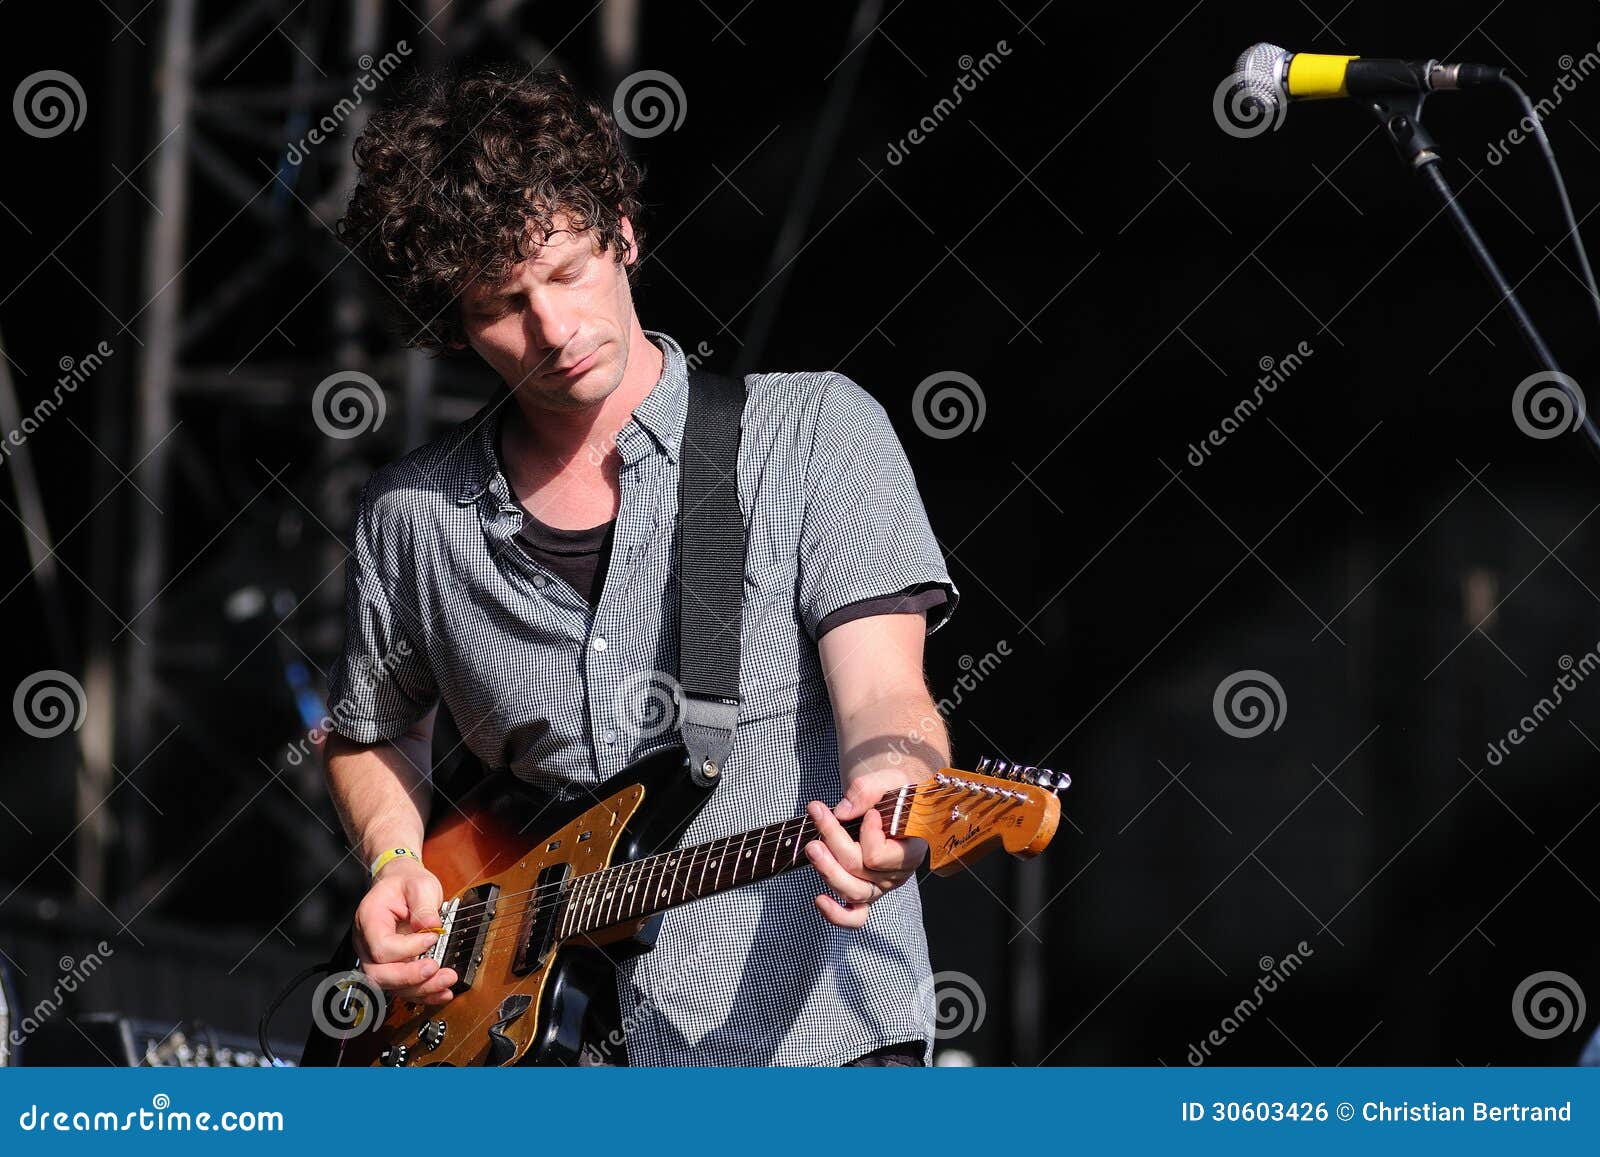 Disappears Band Performs at FIB Editorial Photo - Image of light, loud ...